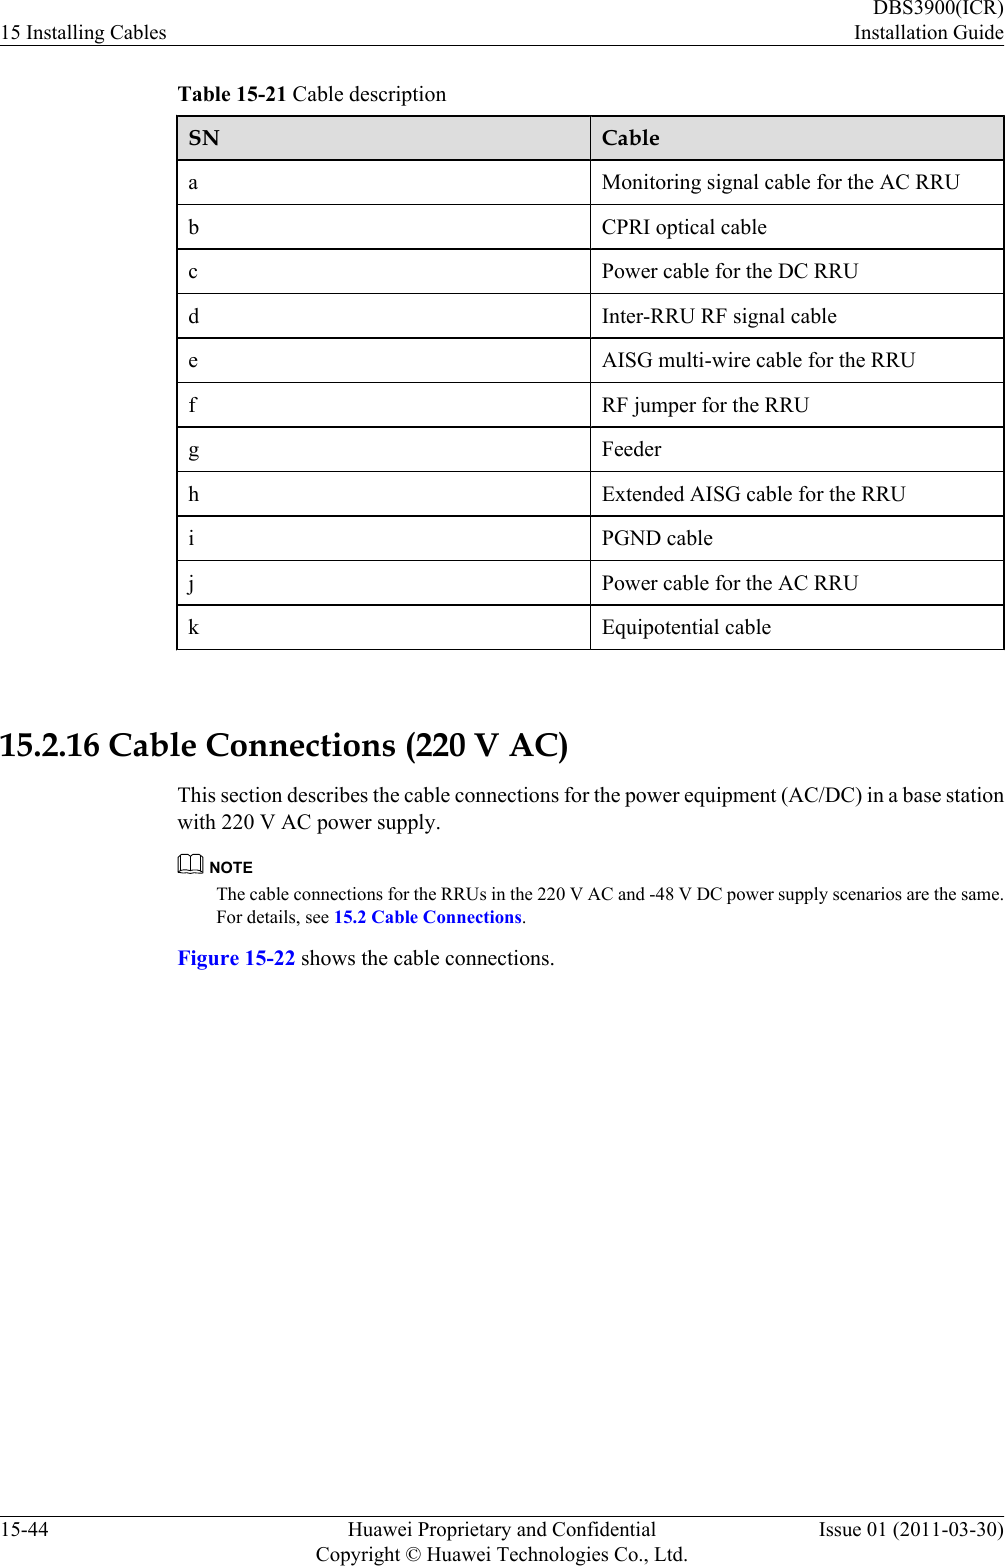 Table 15-21 Cable descriptionSN CableaMonitoring signal cable for the AC RRUb CPRI optical cablec Power cable for the DC RRUd Inter-RRU RF signal cablee AISG multi-wire cable for the RRUf RF jumper for the RRUg Feederh Extended AISG cable for the RRUi PGND cablej Power cable for the AC RRUk Equipotential cable 15.2.16 Cable Connections (220 V AC)This section describes the cable connections for the power equipment (AC/DC) in a base stationwith 220 V AC power supply.NOTEThe cable connections for the RRUs in the 220 V AC and -48 V DC power supply scenarios are the same.For details, see 15.2 Cable Connections.Figure 15-22 shows the cable connections.15 Installing CablesDBS3900(ICR)Installation Guide15-44 Huawei Proprietary and ConfidentialCopyright © Huawei Technologies Co., Ltd.Issue 01 (2011-03-30)